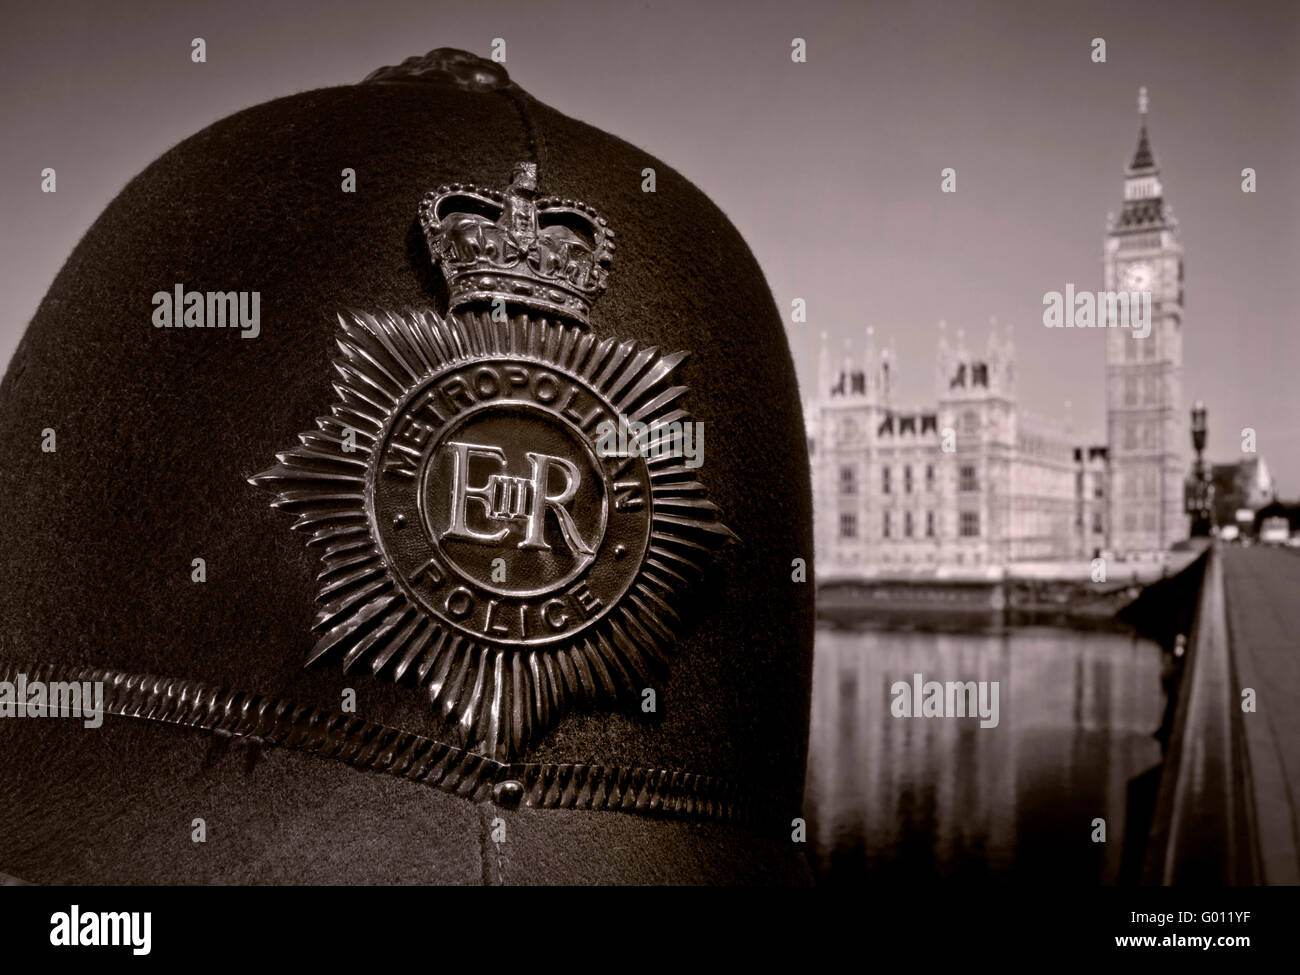 Police LONDON 1960's Metropolitan police helmet close view on historic retro helmet with Houses of Parliament & River Thames behind Westminster UK B&W Stock Photo